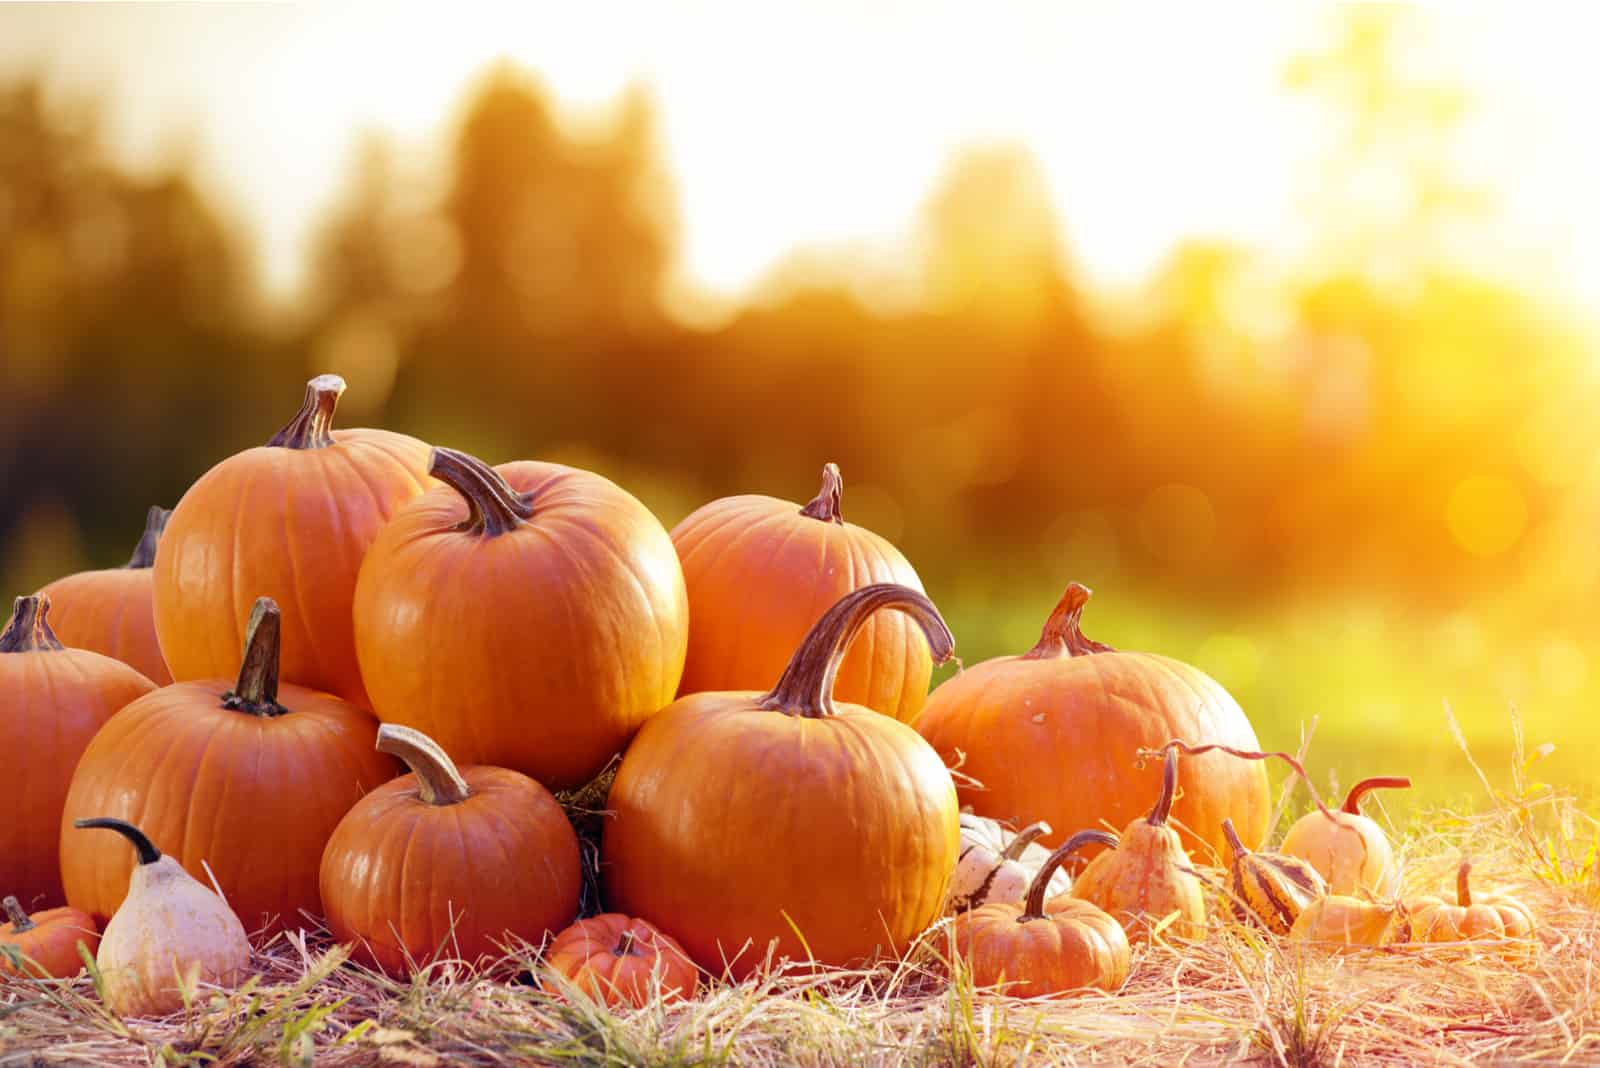 What Is The Average Pumpkin Weight?